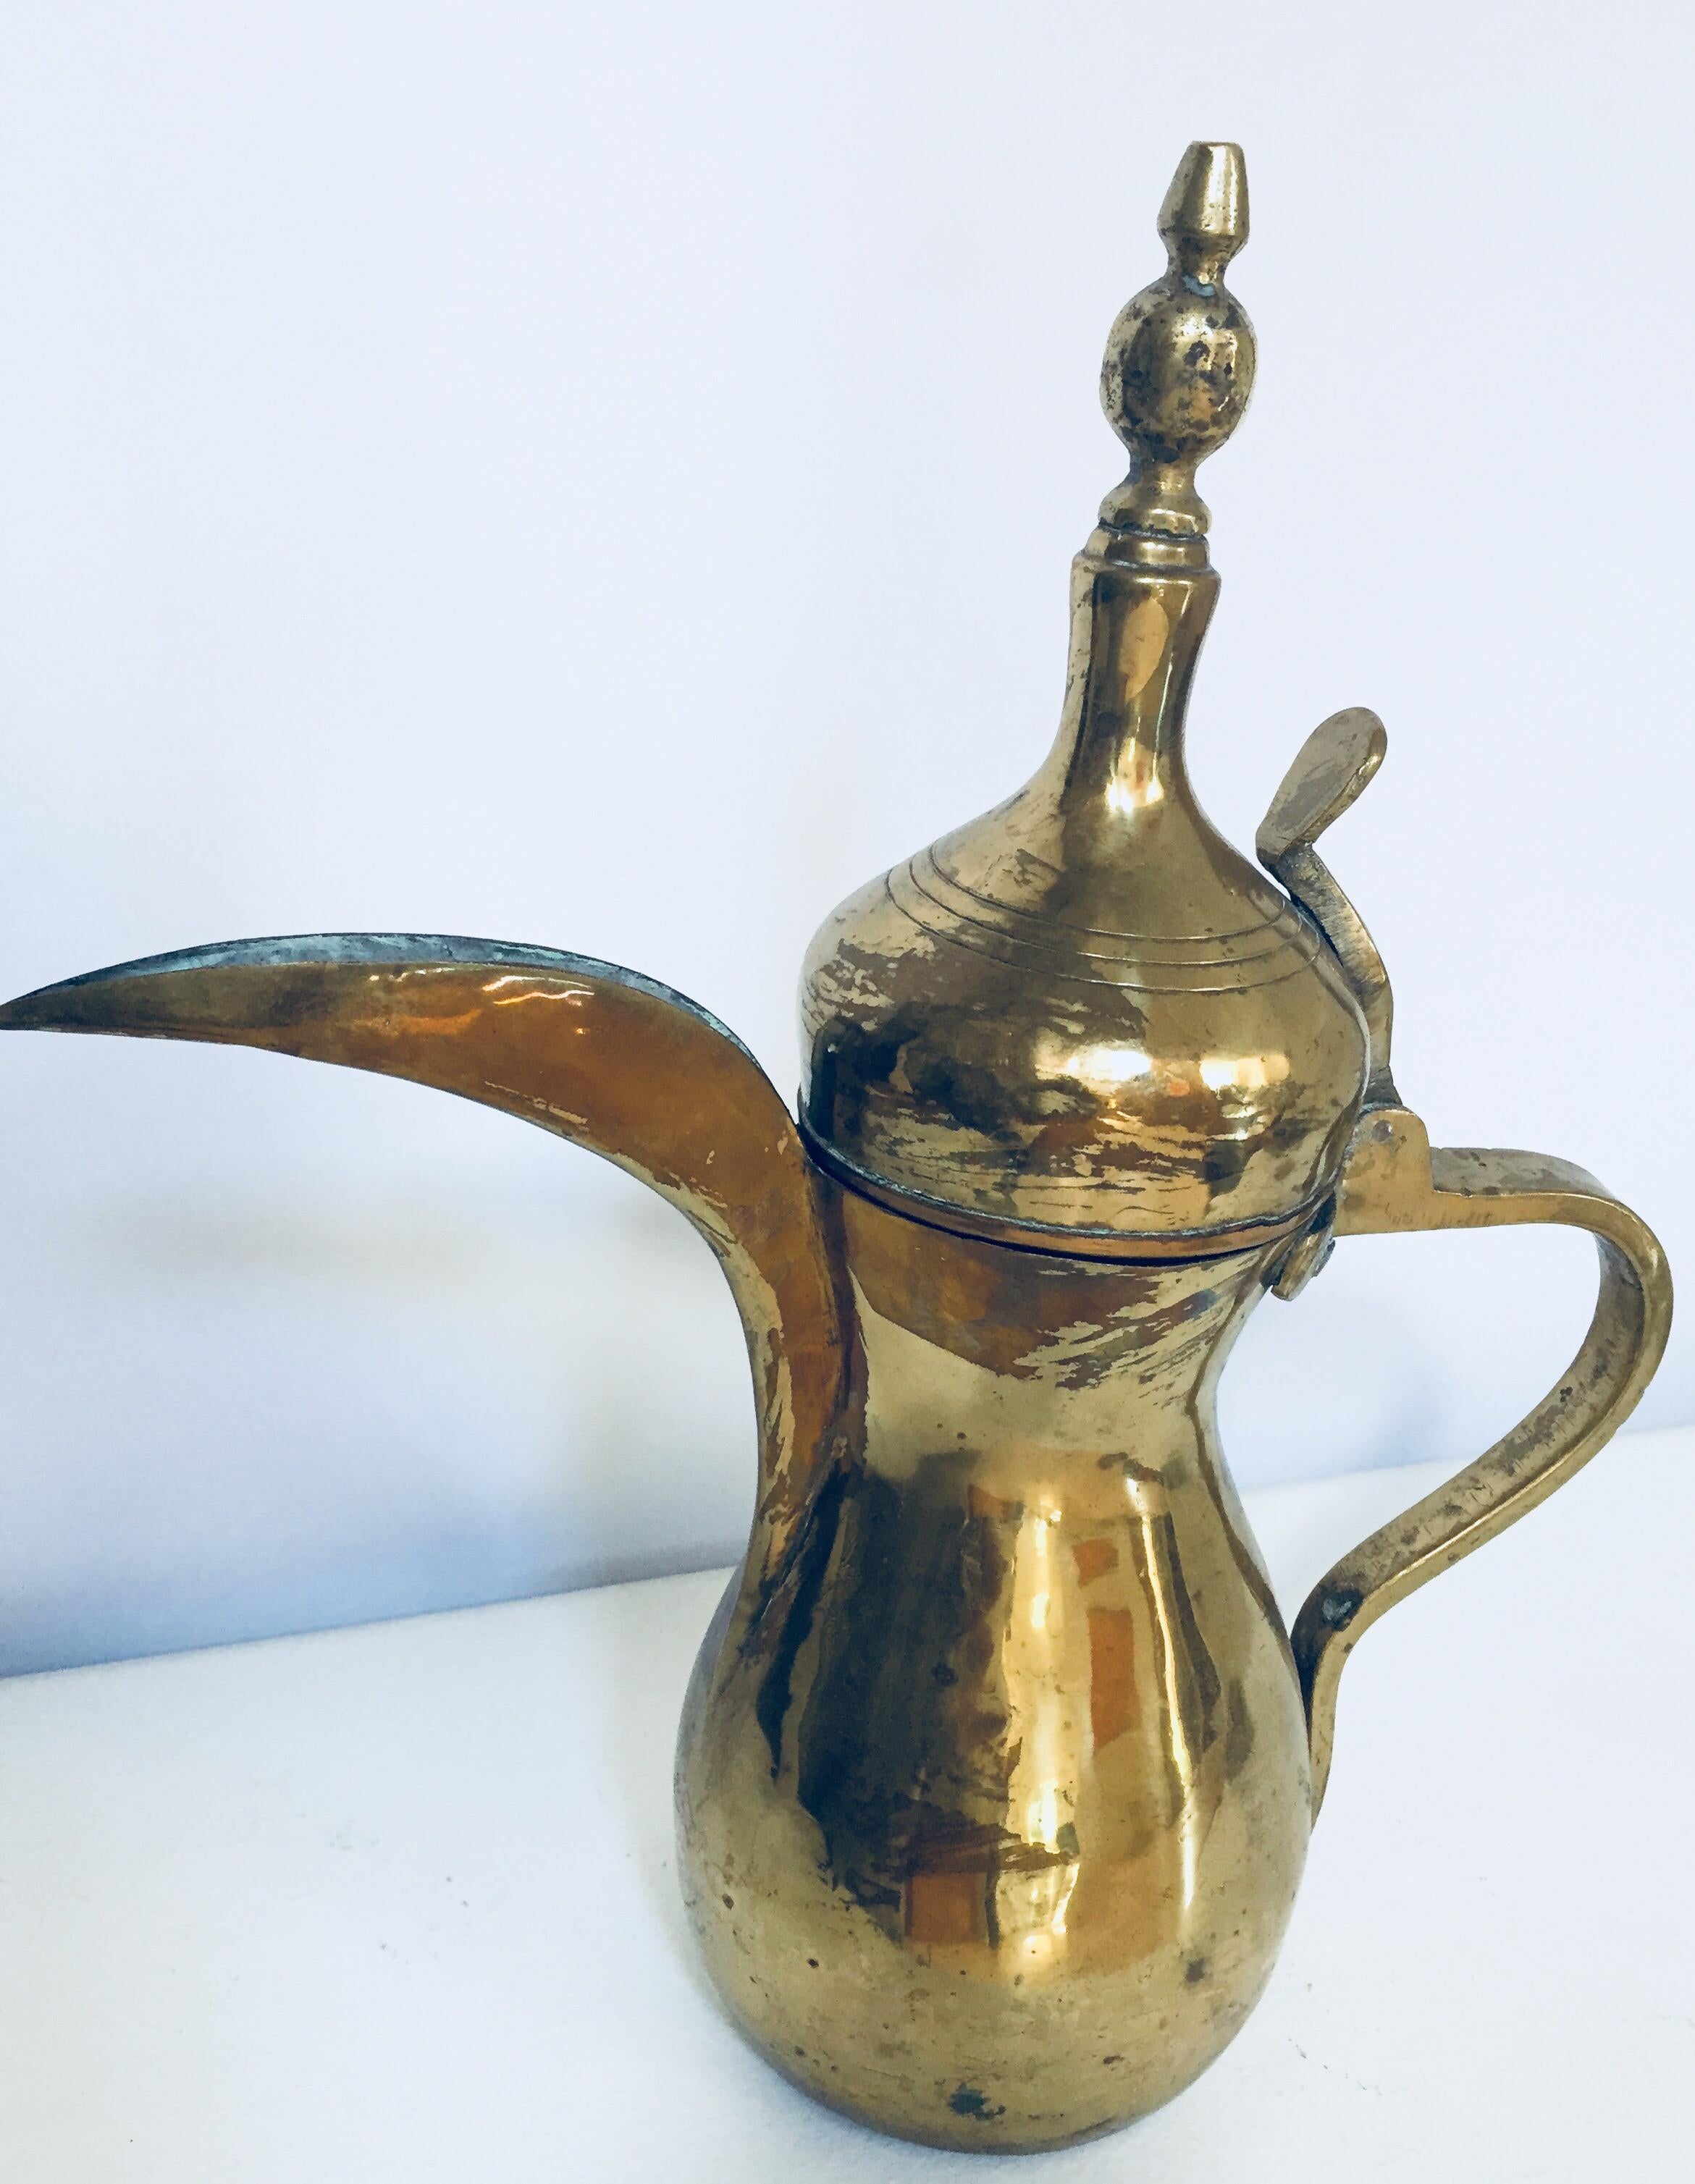 Middle Eastern traditional Arabian brass Dallah coffee pot. 
Coffee pot hand-hammered and chased brass with riveted brass finish and a very large spout. 
Size: 9